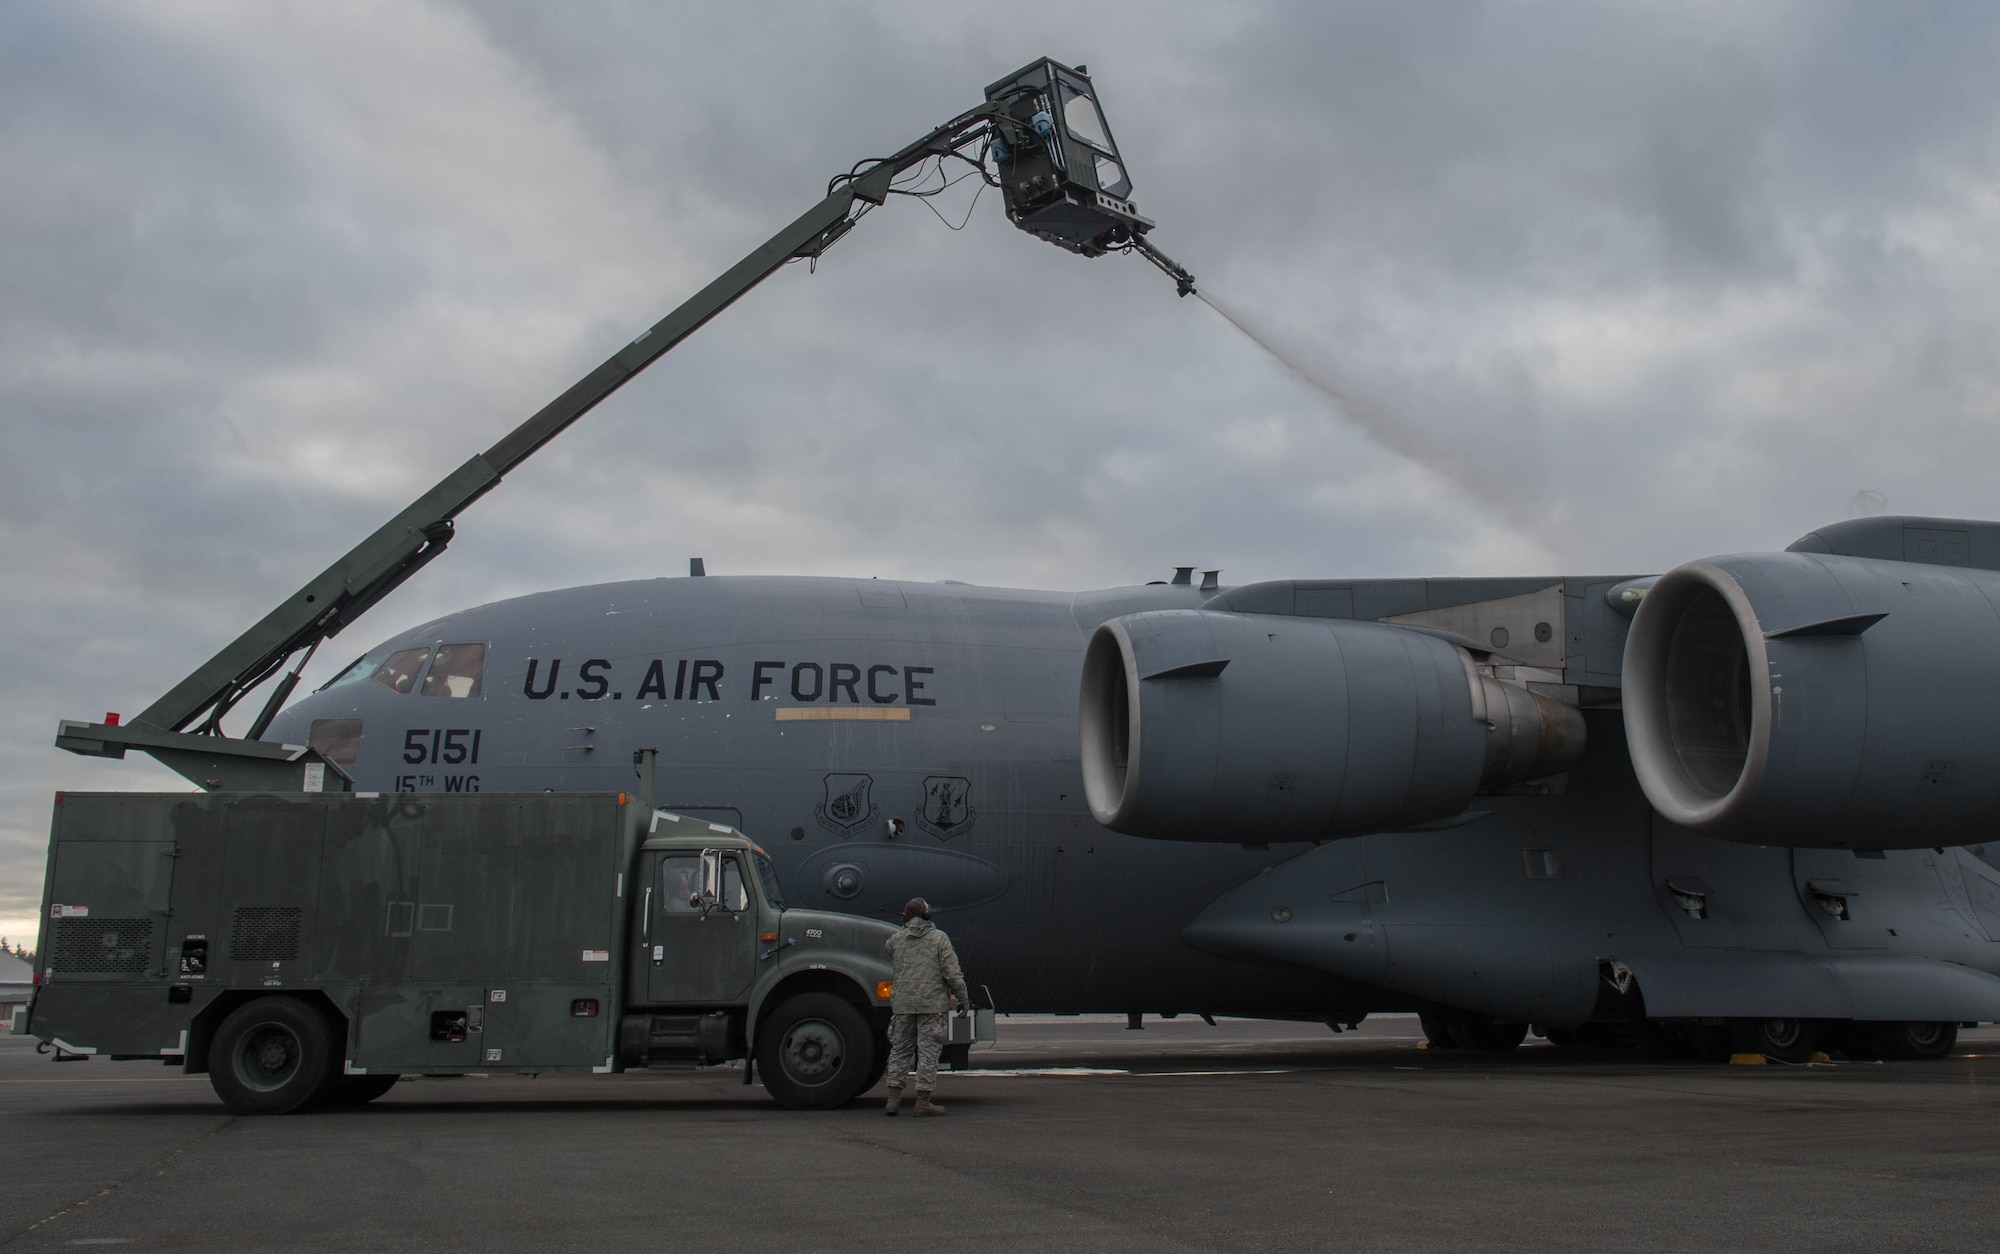 Maintainers from the 821st Contingency Response Group, deice a C-17 Globemaster III aircraft from Joint Base Pearl Harbor-Hickam, Hawaii, before taking off, Jan. 24, 2017, at Joint Base Lewis-McChord, Washington. With temperatures well below freezing the deicer is used to provide protection of aircraft surfaces, engines and aircraft sensors from the elements. (U.S. Air Force photo by Staff Sgt. Robert Hicks)